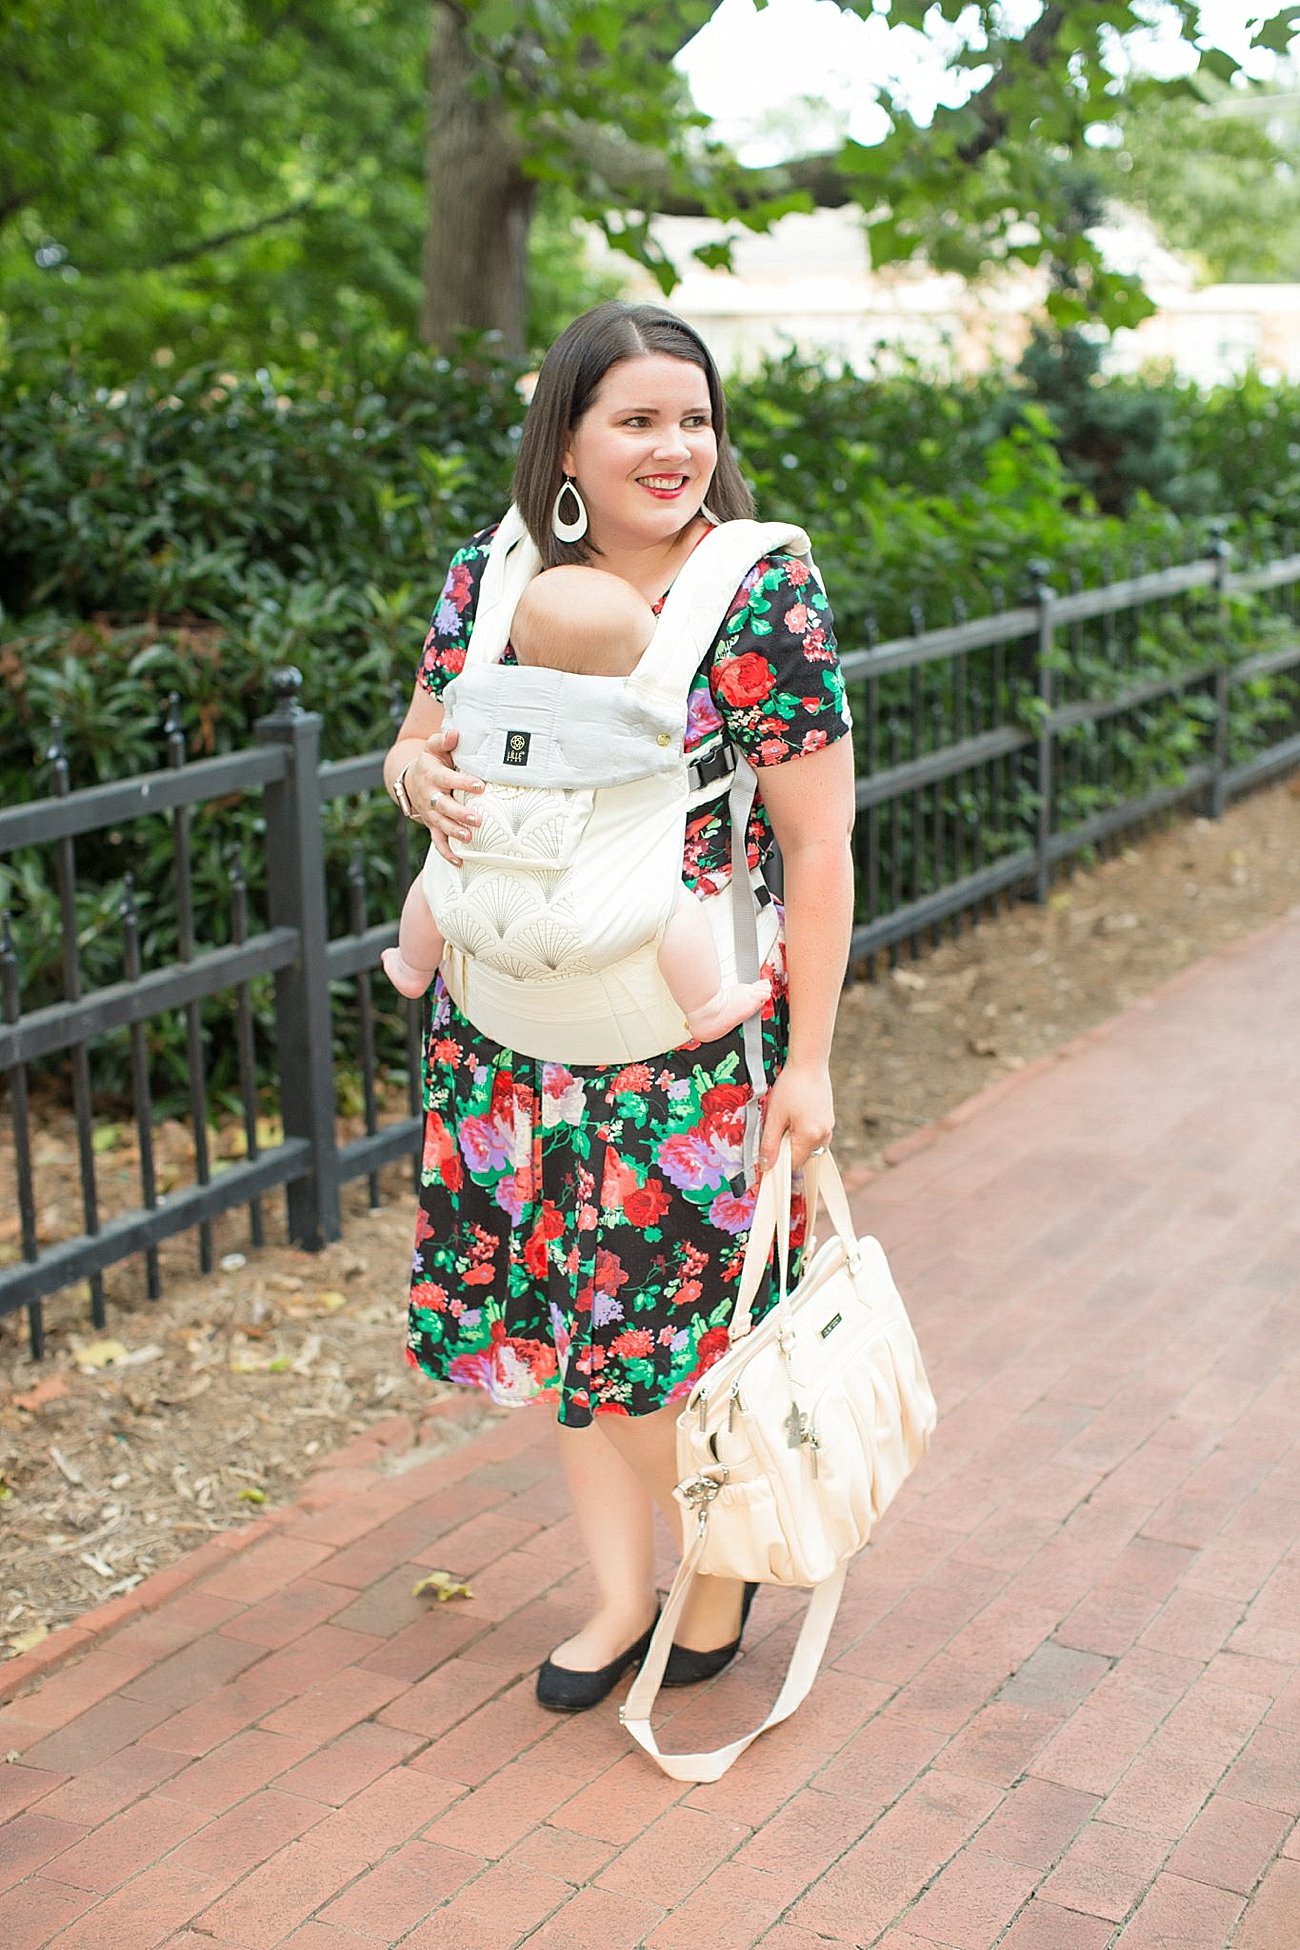 LulaRoe floral Amelia dress, Lillebaby Complete Embossed Luxe carrier in Brilliance, The Root Collective shoes, Kalencom "Berlin" Diaper Bag | North Carolina Fashion Blogger (2)